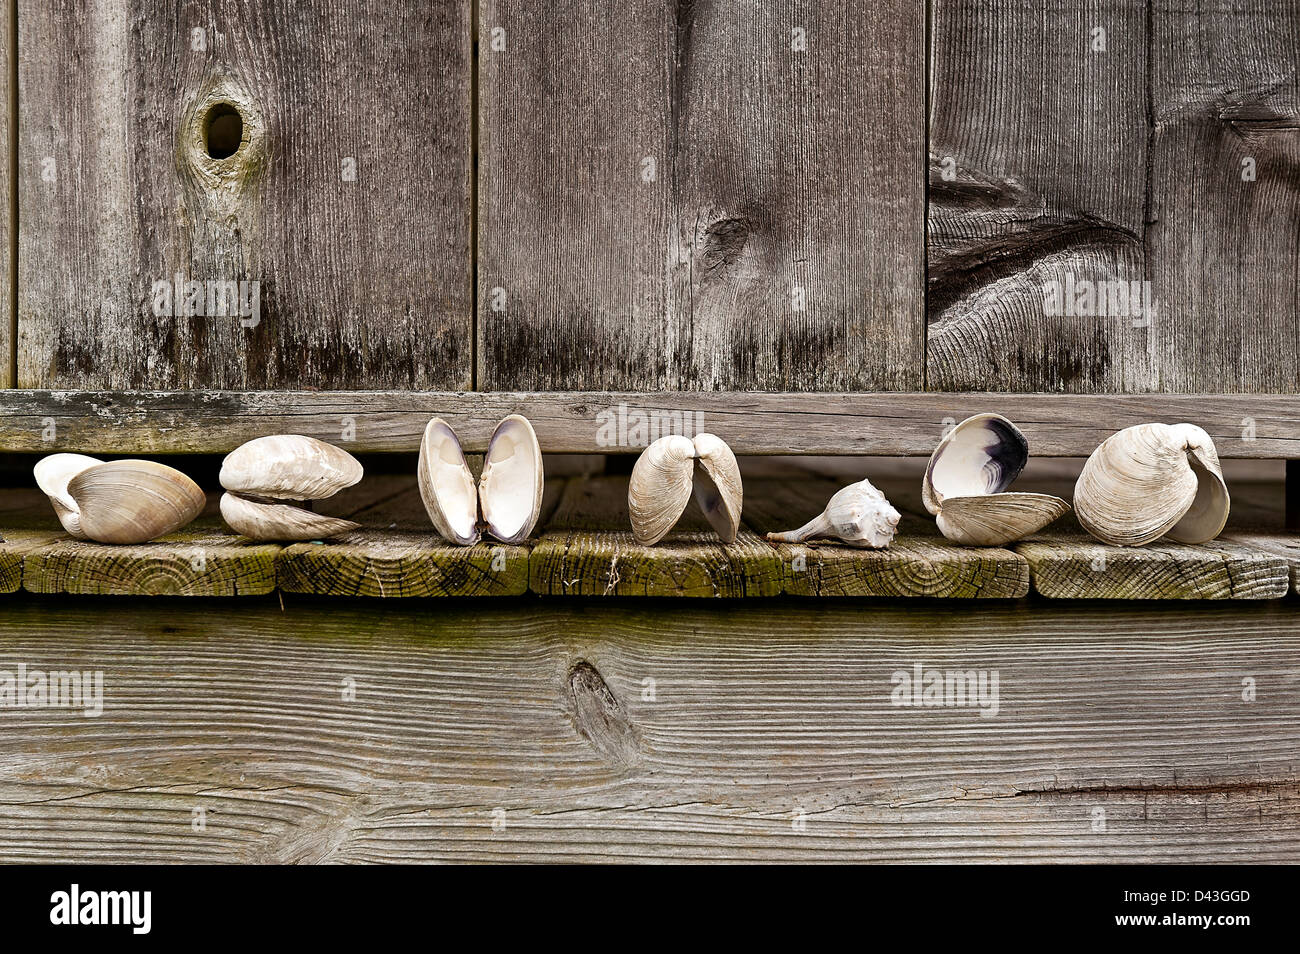 Seashells lined up by a rustic outdoor shower. Stock Photo